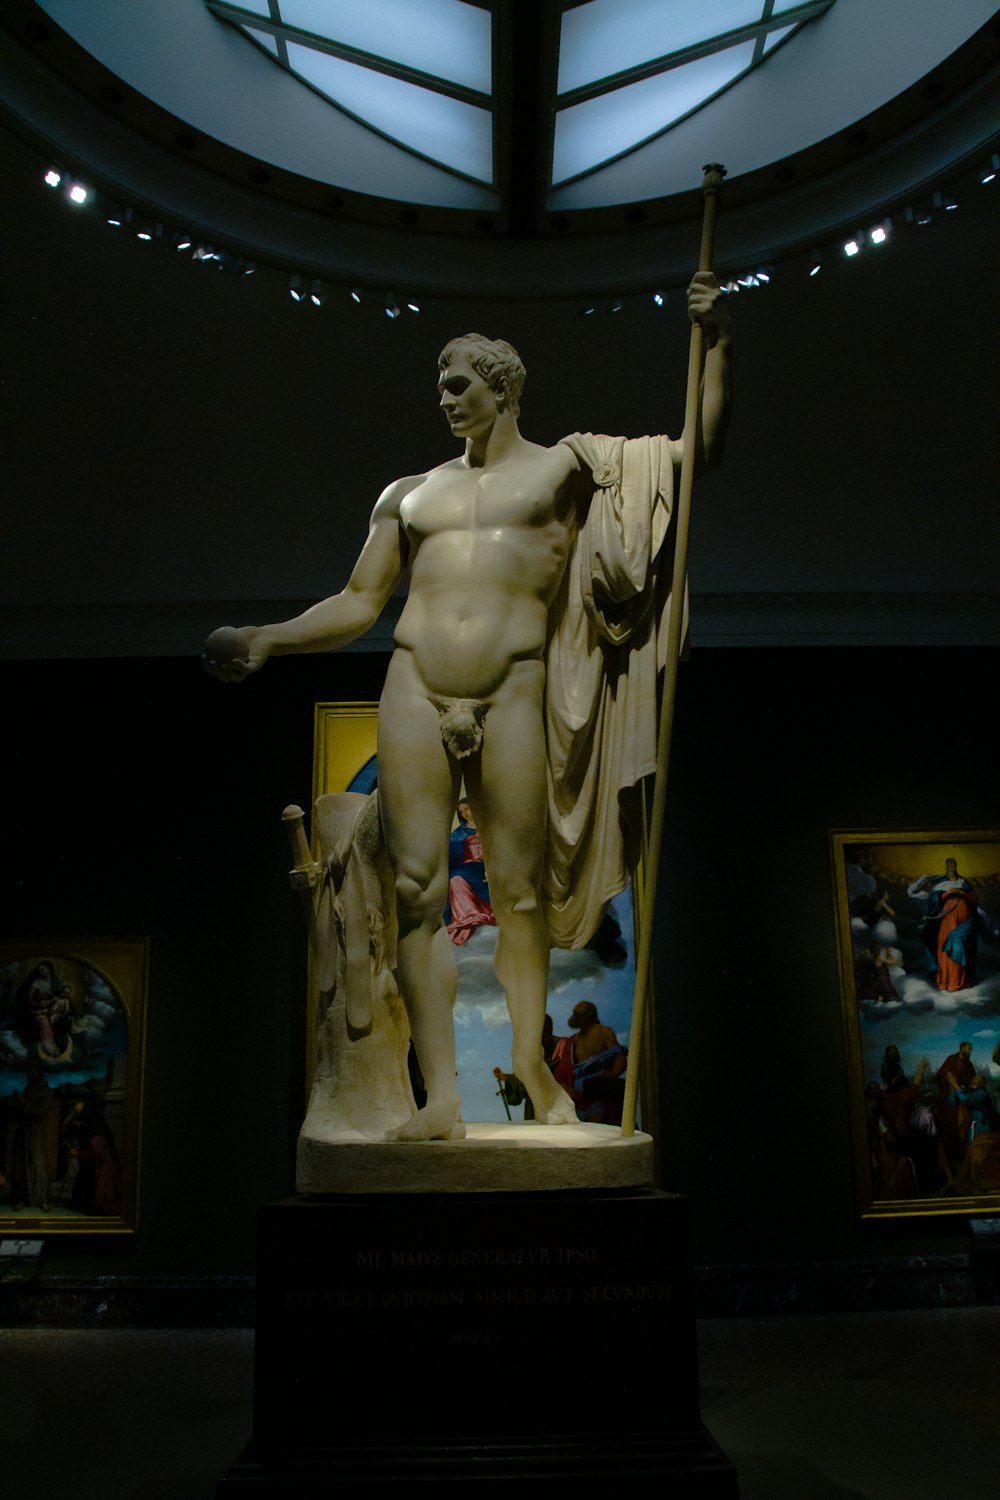 a statue of a man holding a flag in a museum